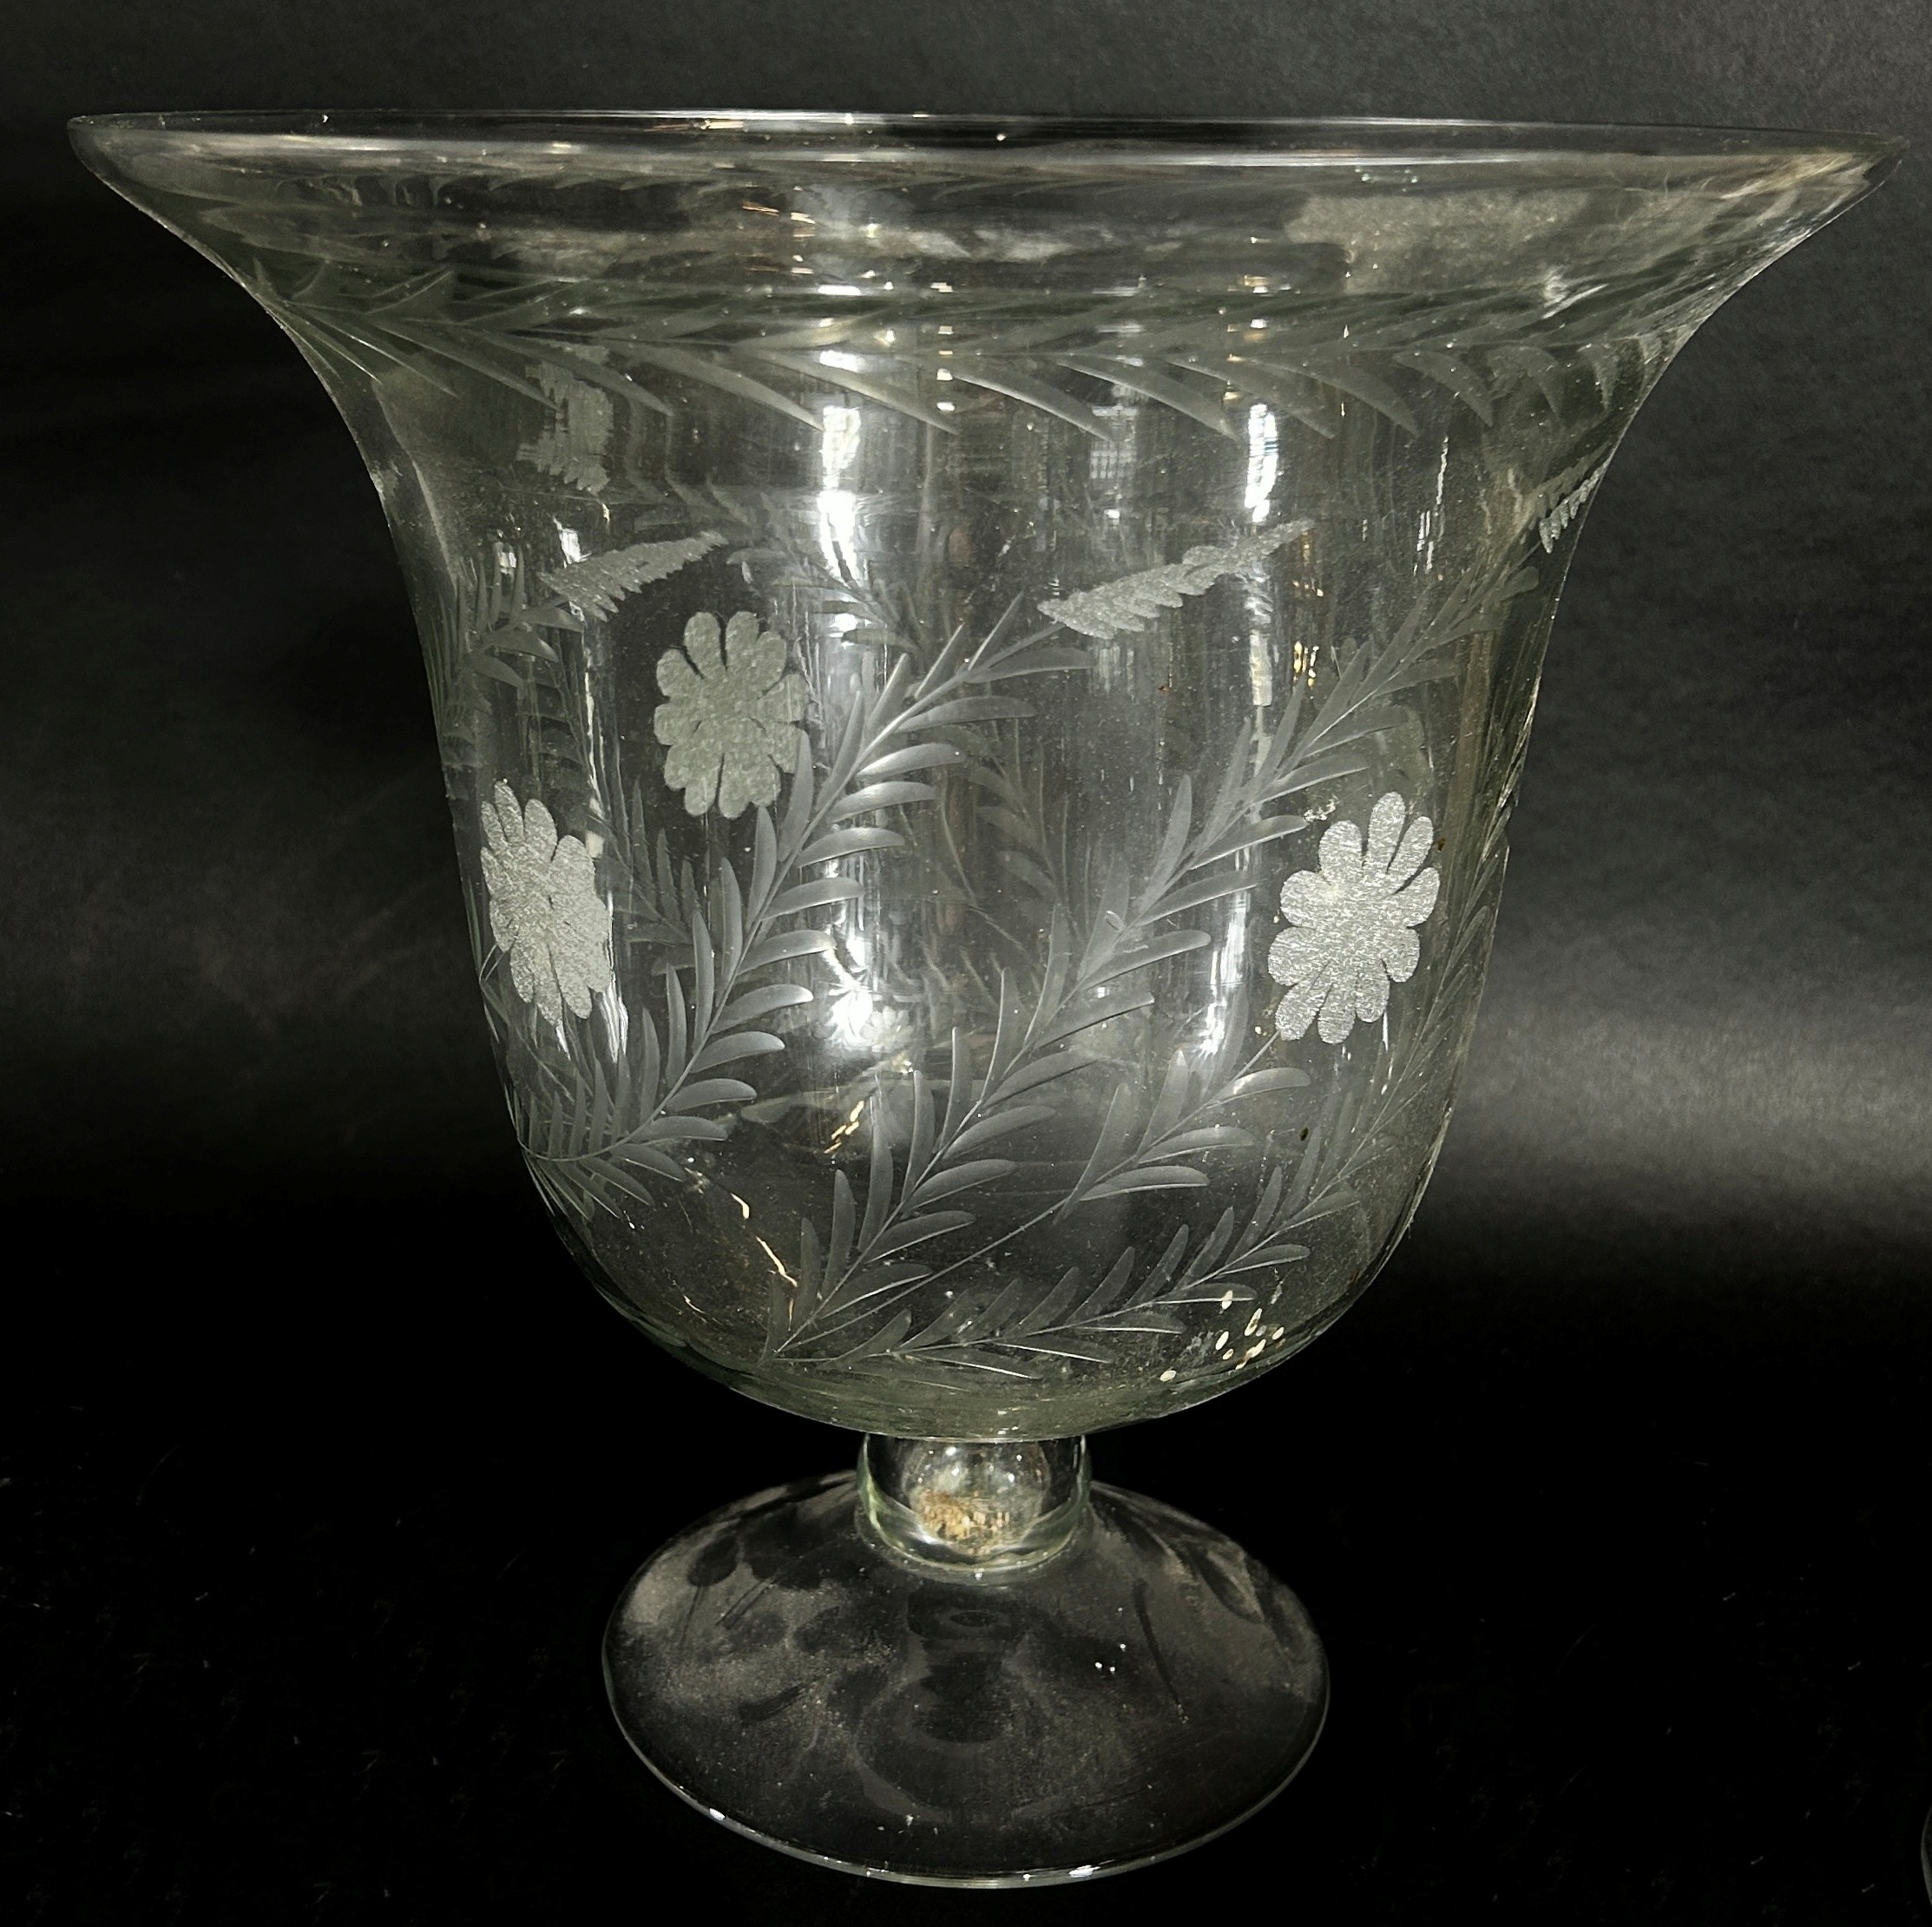 A decorative campana shaped glass vase with engraved fern decoration 29.5cm high x 29.5cm diameter - Image 2 of 3